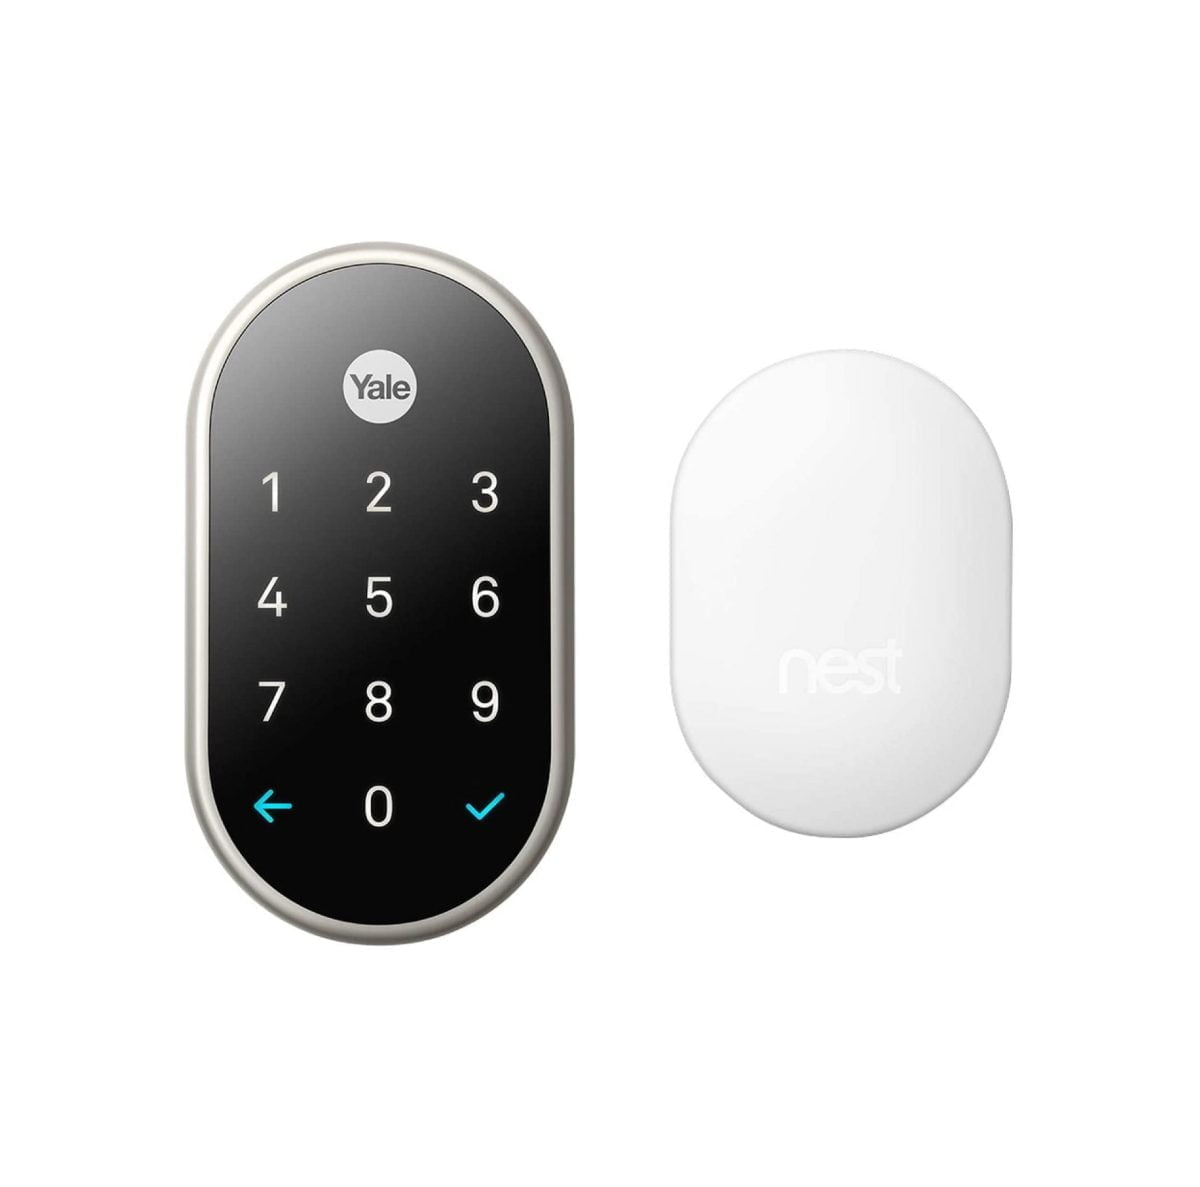 Nest Lock 02 Scaled Google &Lt;Ul Class=&Quot;A-Unordered-List A-Vertical A-Spacing-Mini&Quot;&Gt; &Lt;Li&Gt;&Lt;Span Class=&Quot;A-List-Item&Quot;&Gt;Secure And Tamper Proof: Replaces The Deadbolt You Already Have. If Someone Tries To Tamper With It, You'Ll Get An Alert. If The Batteries Start Running Low, You'Ll Know Right Away. And If Your Lock Loses Power, You Can Quickly Charge It With A 9V Battery To Unlock The Door.&Lt;/Span&Gt;&Lt;/Li&Gt; &Lt;Li&Gt;&Lt;Span Class=&Quot;A-List-Item&Quot;&Gt;Let Someone In From Anywhere: Unlock Your Door From Your Nest App. Create Passcodes For Family, Guests And People You Trust. Get Alerts Whenever Someone Unlocks And Locks The Door. And When Nest Knows You’re Away, Your Door Can Lock Automatically.&Lt;/Span&Gt;&Lt;/Li&Gt; &Lt;Li&Gt;&Lt;Span Class=&Quot;A-List-Item&Quot;&Gt;Works With Google Assistant: Check The Status Of Your Door And Lock It From Anywhere Hands‑Free With The Google Assistant. You Can Also Enter A Passcode, Use One‑Touch Locking, Or Lock It From The Nest App.&Lt;/Span&Gt;&Lt;/Li&Gt; &Lt;Li&Gt;&Lt;Span Class=&Quot;A-List-Item&Quot;&Gt;Touchscreen Keypad: No Phone? No Problem. Unlock Your Nest X Yale Lock By Entering Your Passcode On The Touchscreen Keypad. Create Passcodes For People You Trust.&Lt;/Span&Gt;&Lt;/Li&Gt; &Lt;/Ul&Gt; Https://Youtu.be/Dbdxol3Avxe Google Rb-Yrd540-Wv-619 X Yale Lock With Nest Connect Google Rb-Yrd540-Wv-619 X Yale Lock With Nest Connect, Satin Nickel